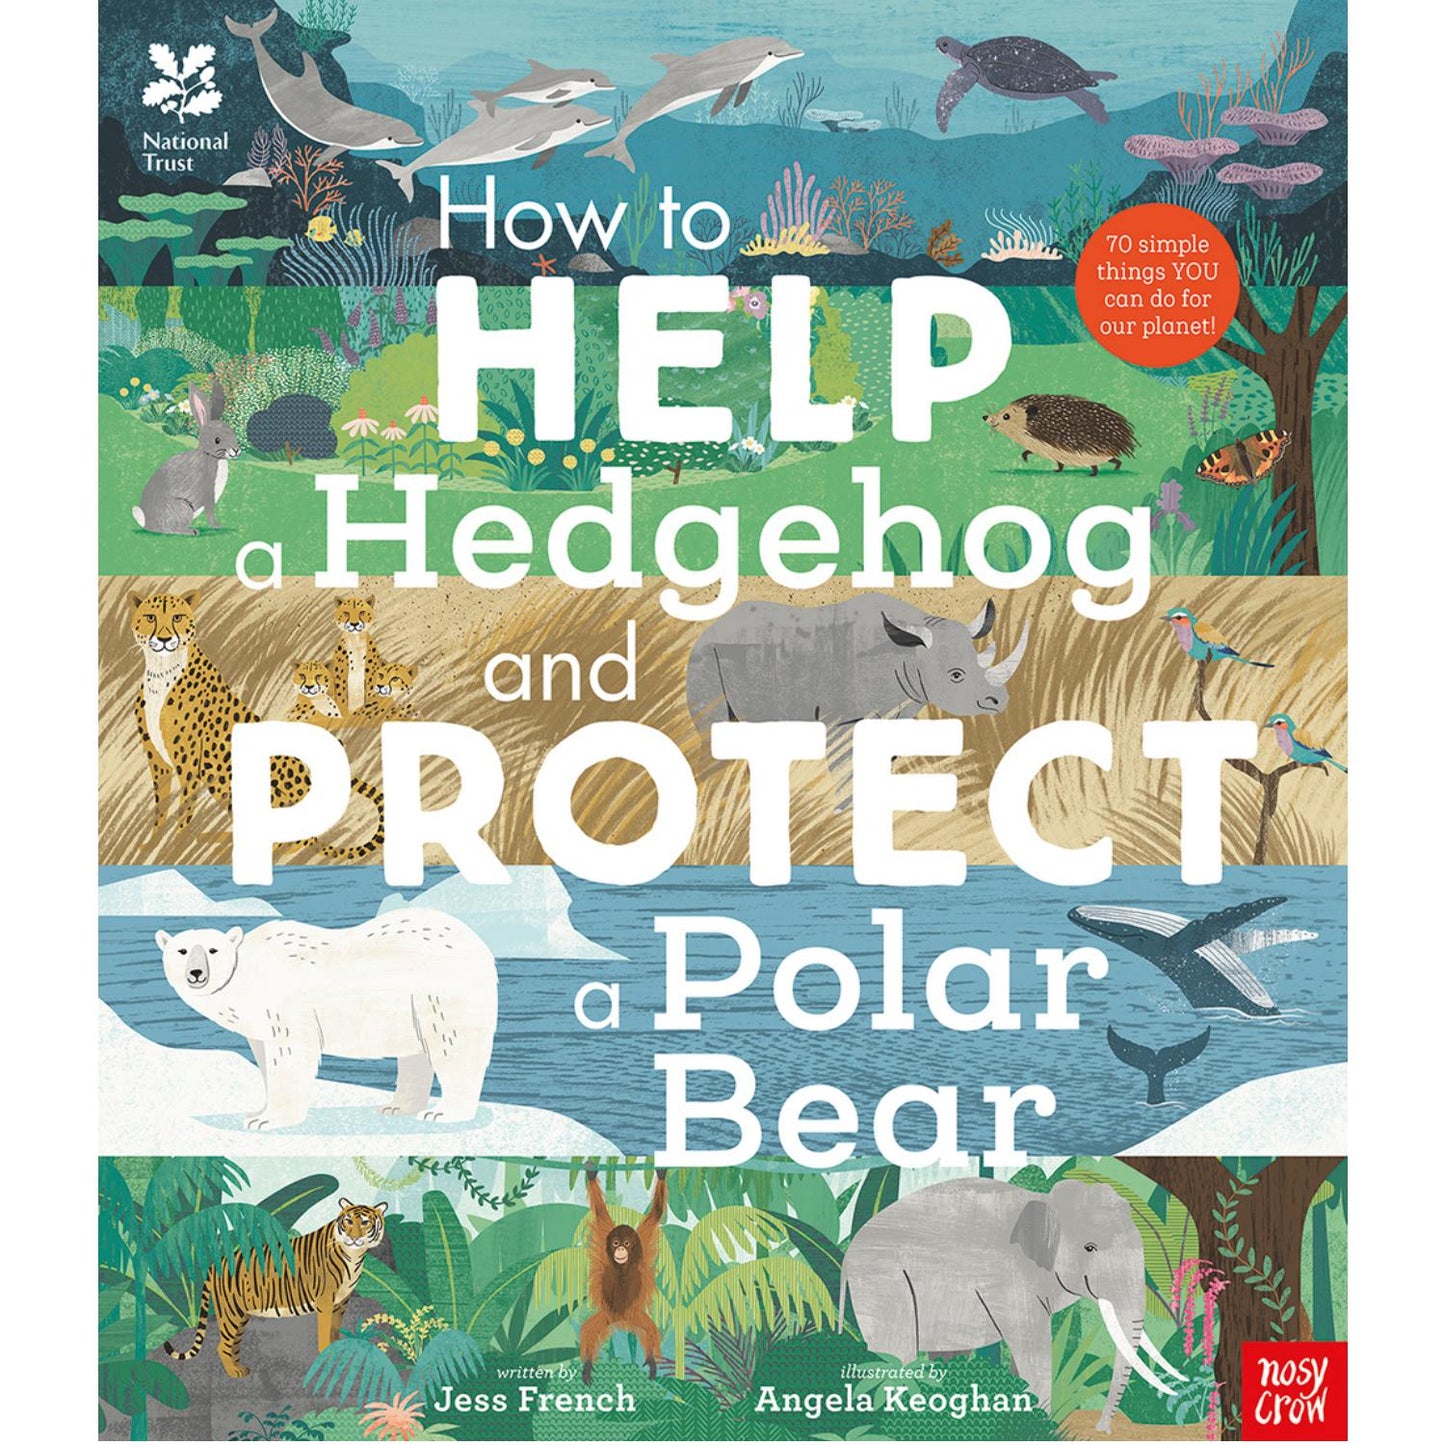 How to Help a Hedgehog and Protect a Polar Bear | Children's Books on Activism